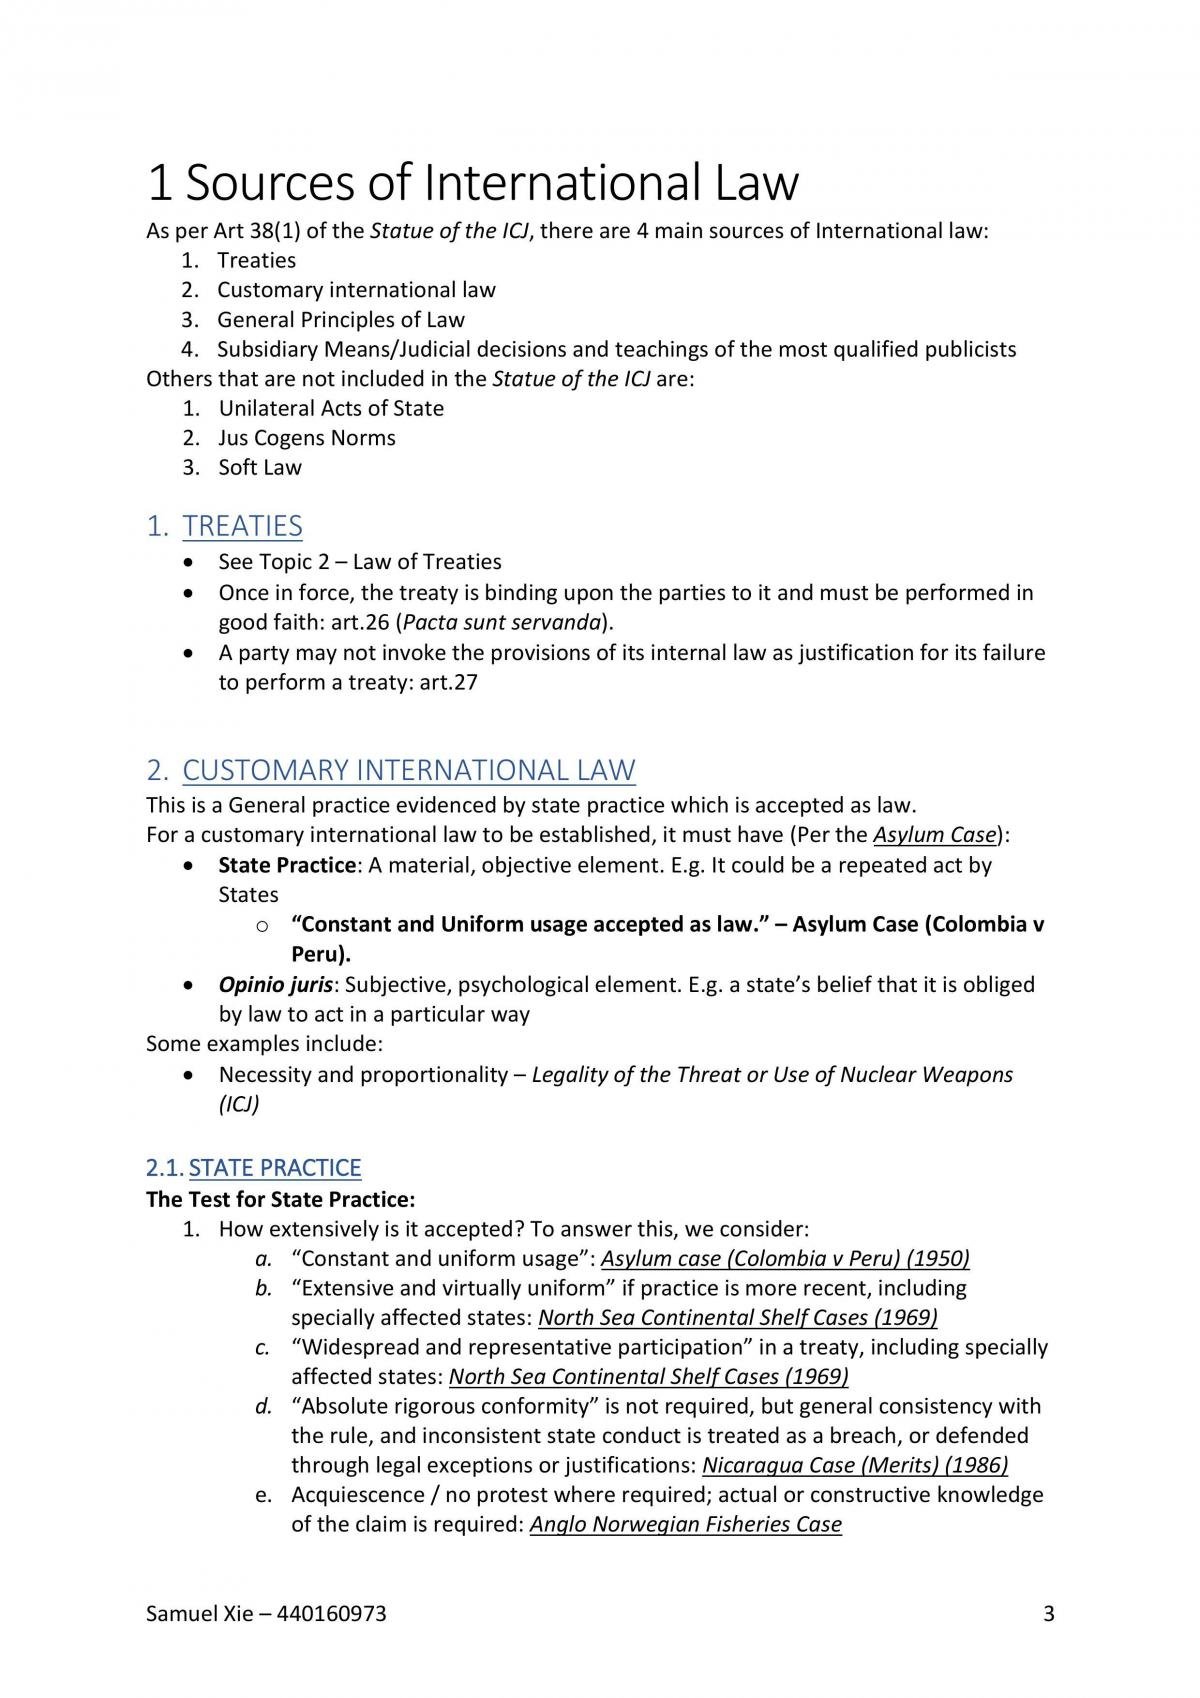 Public International Law Full Notes - Page 3